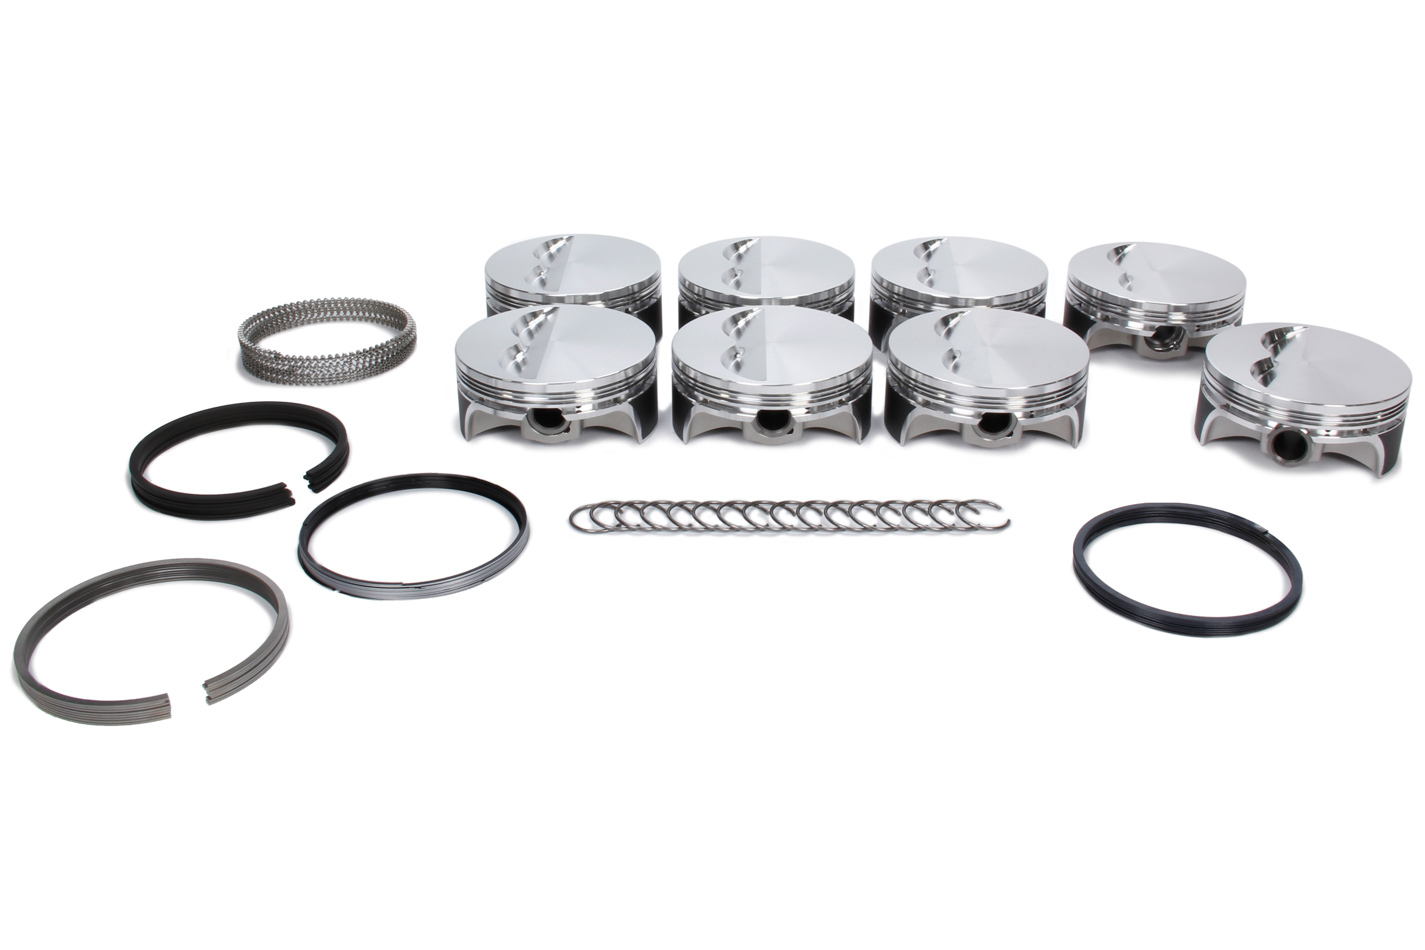 SRP Pistons 295444 Piston and Ring, Professional Series, Forged, 4.125 in Bore, 1.2 x 1.5 x 3.0 mm Ring Groove, Minus 5.00 cc, Small Block Chevy, Kit